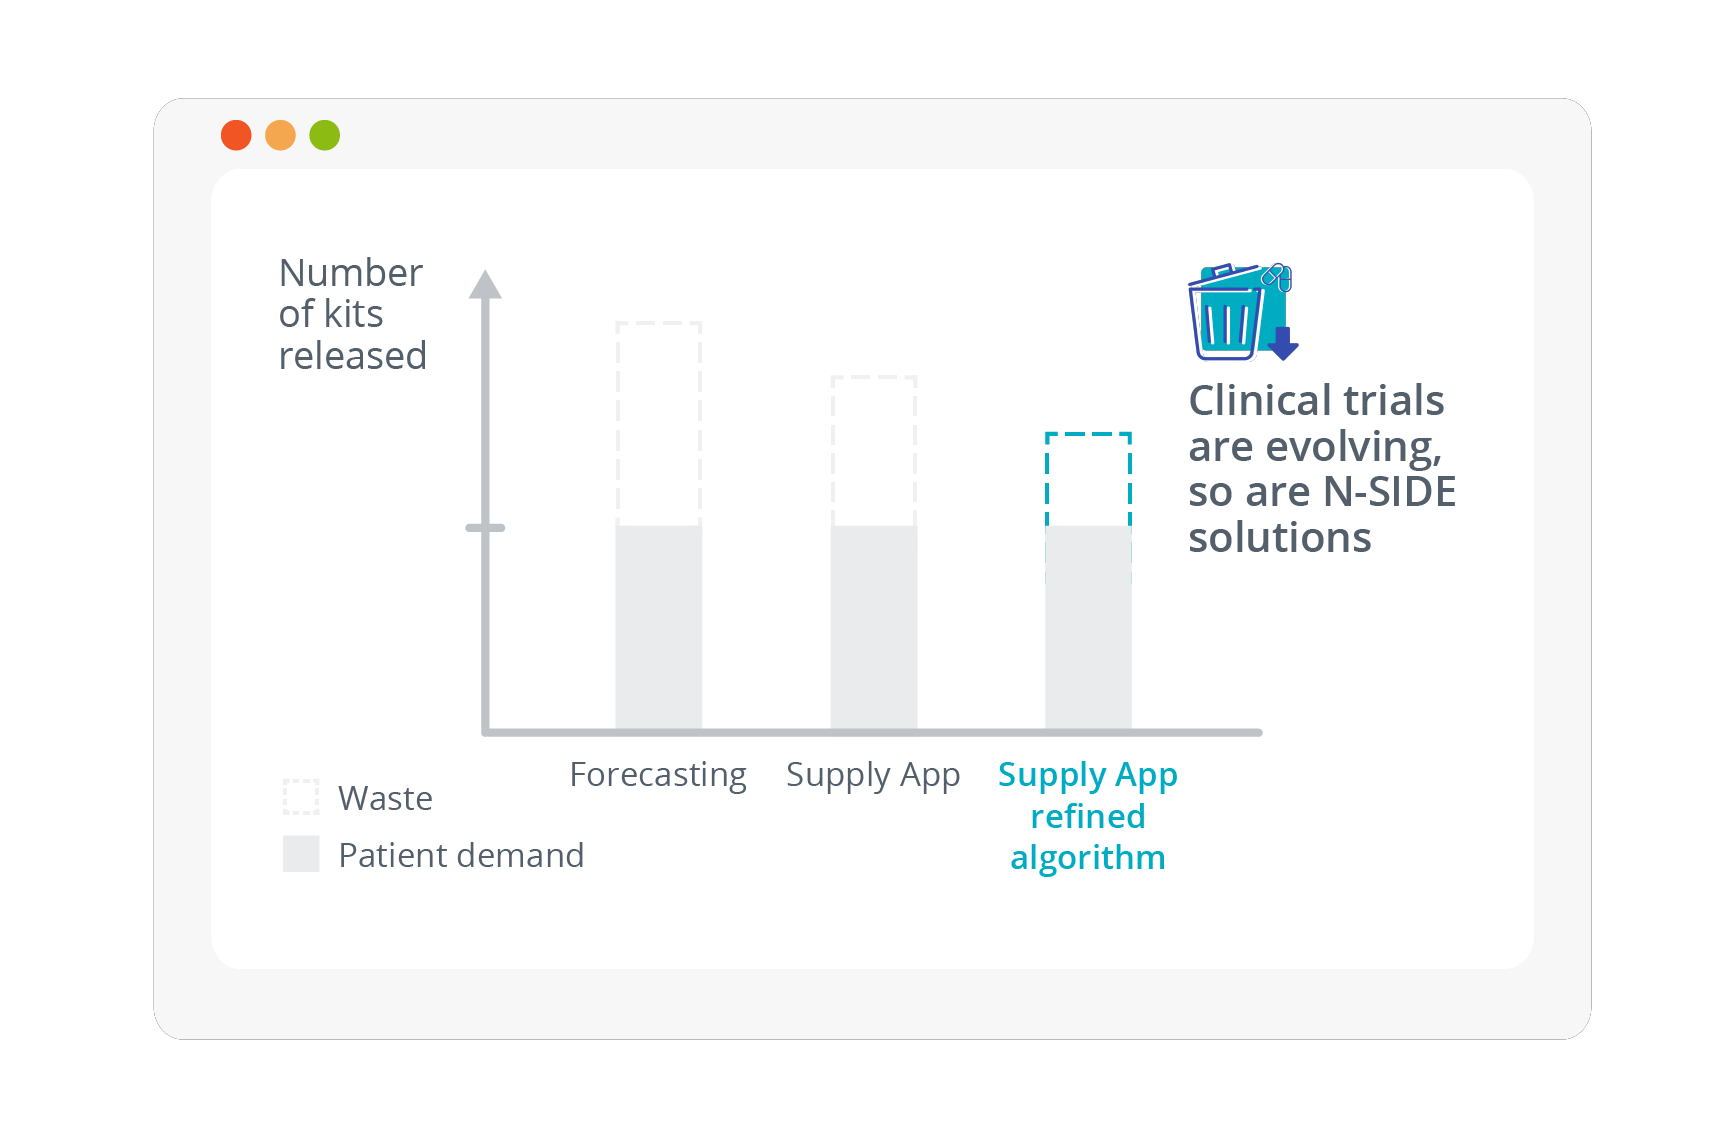 Decrease clinical trial supply chain waste even more with the N-SIDE Supply App refined algorithm